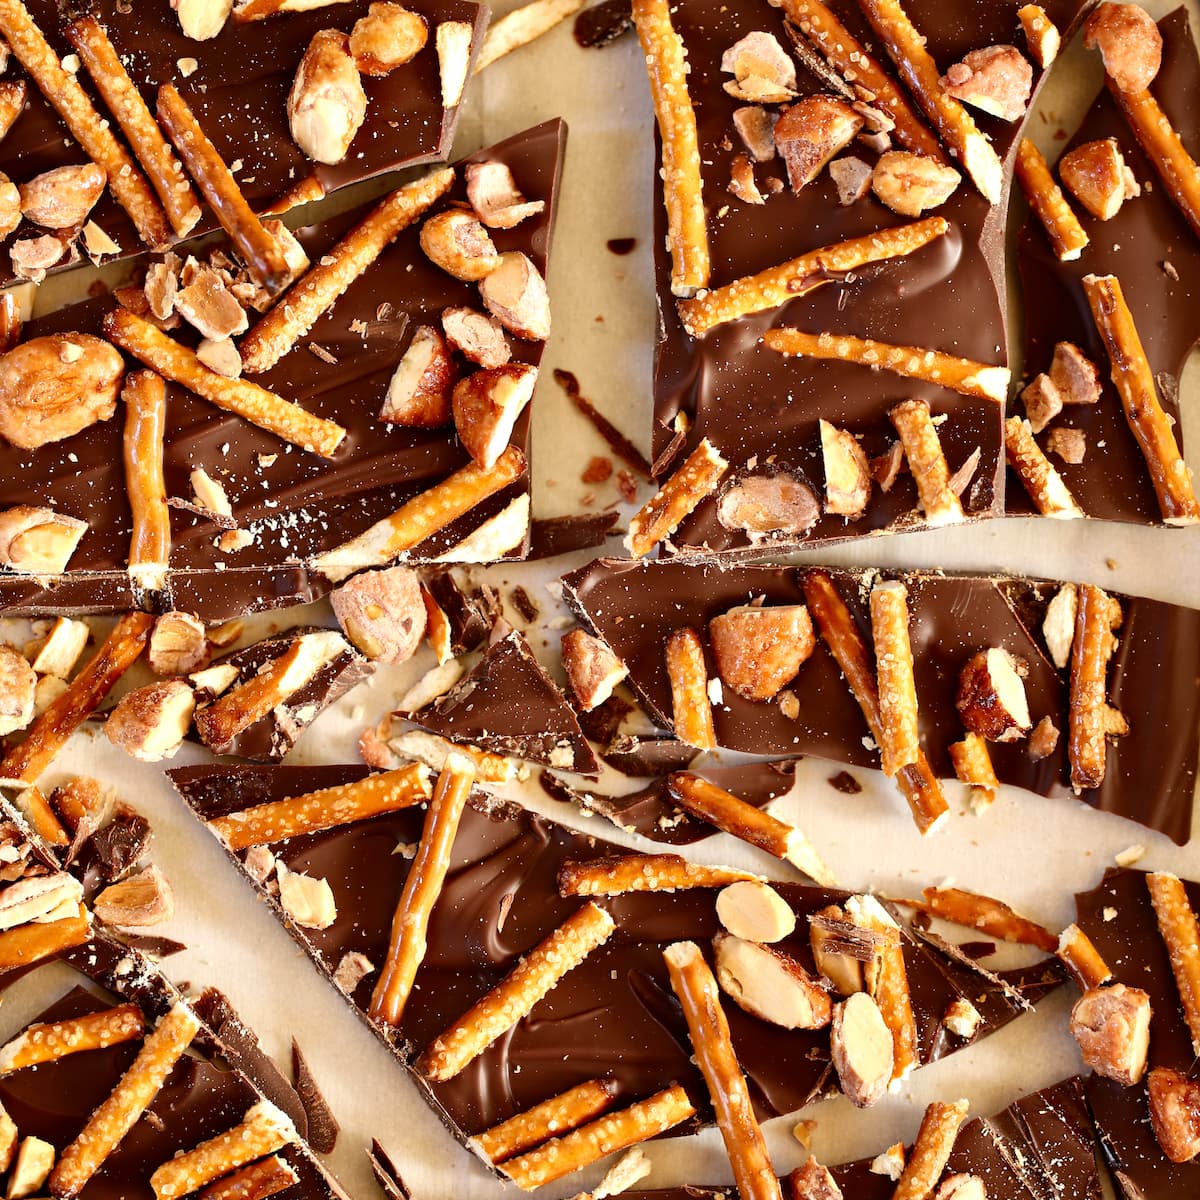 a close up photo of chocolate bark and pretzels.